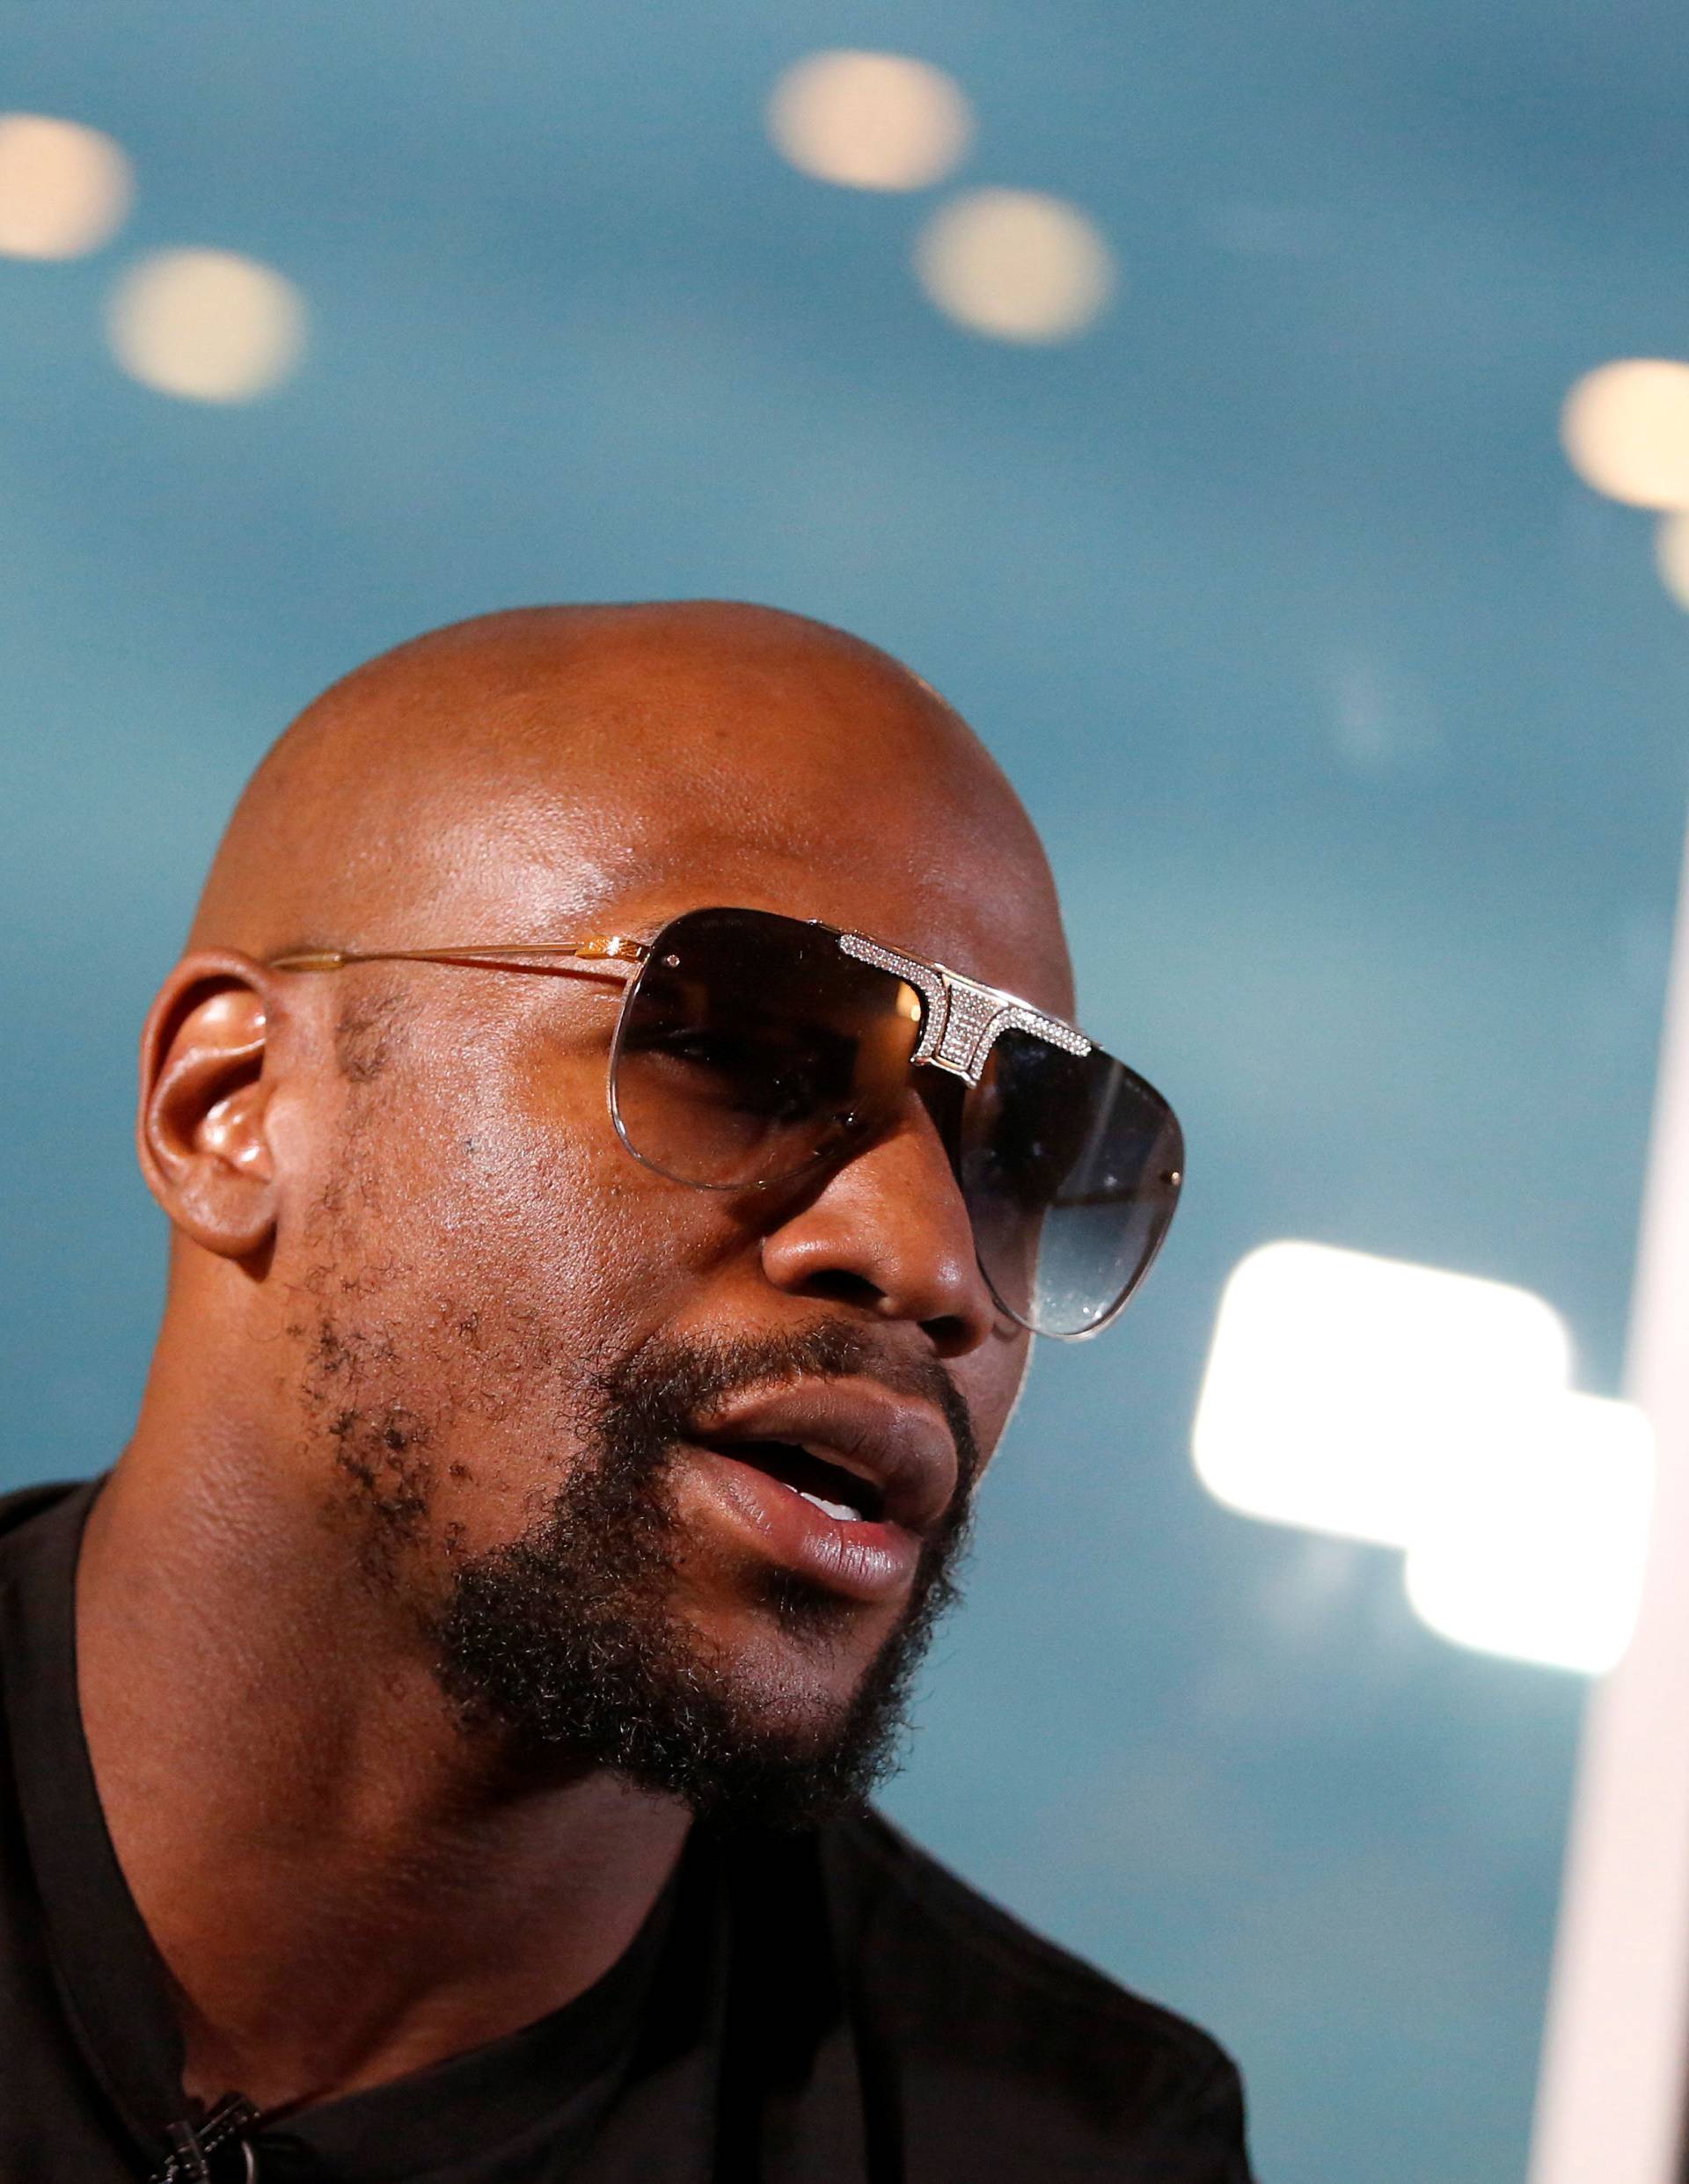 Undefeated boxer Mayweather Jr. of the U.S. speaks during an interview with Reuters in Tokyo